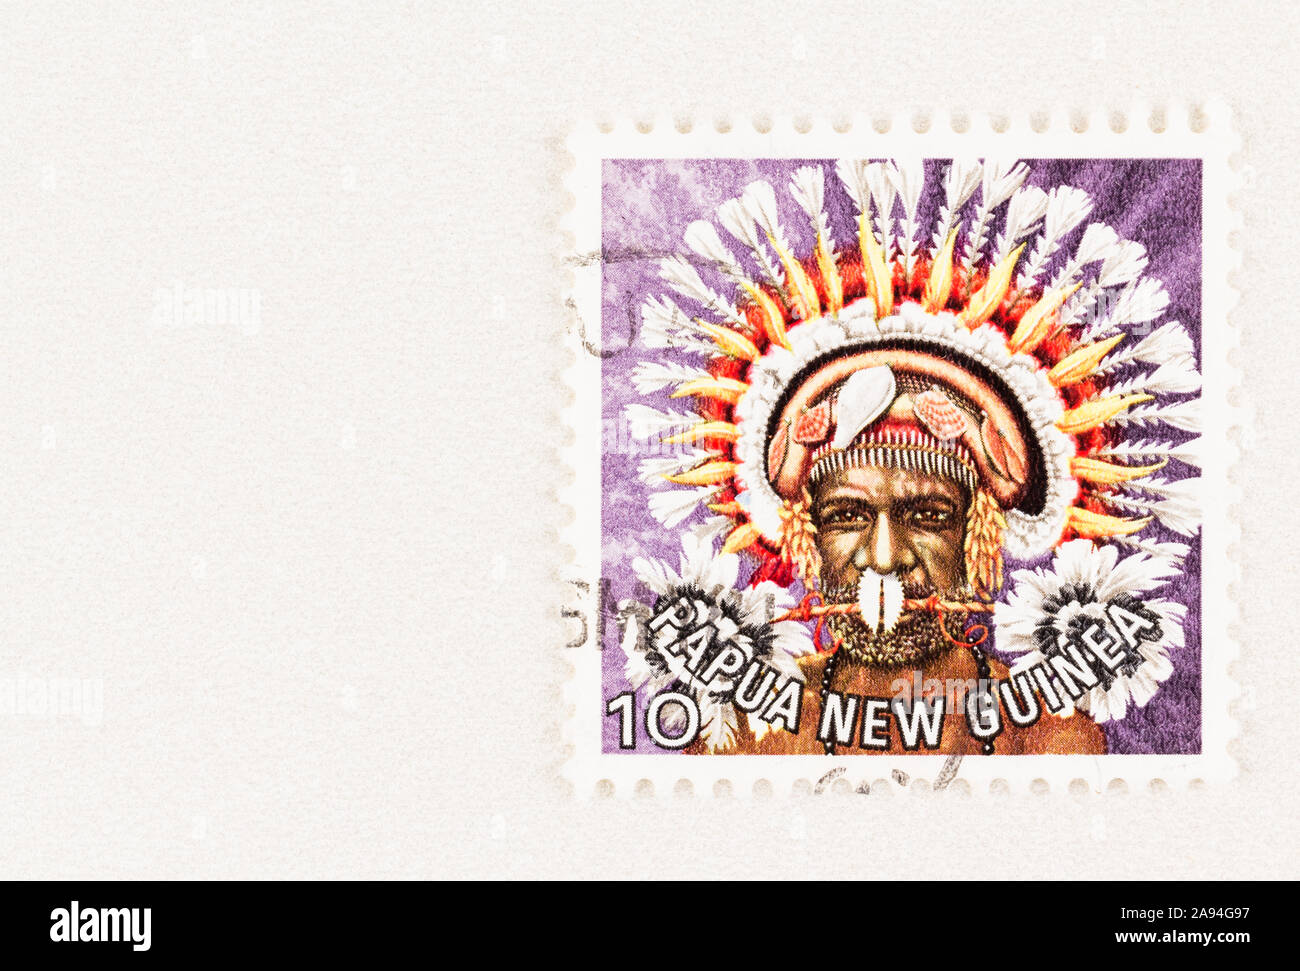 SEATTLE WASHINGTON - October 5, 2019: Papua New Guinea postage stamp with man in traditional headdress with copy space, issue in 1977 Stock Photo